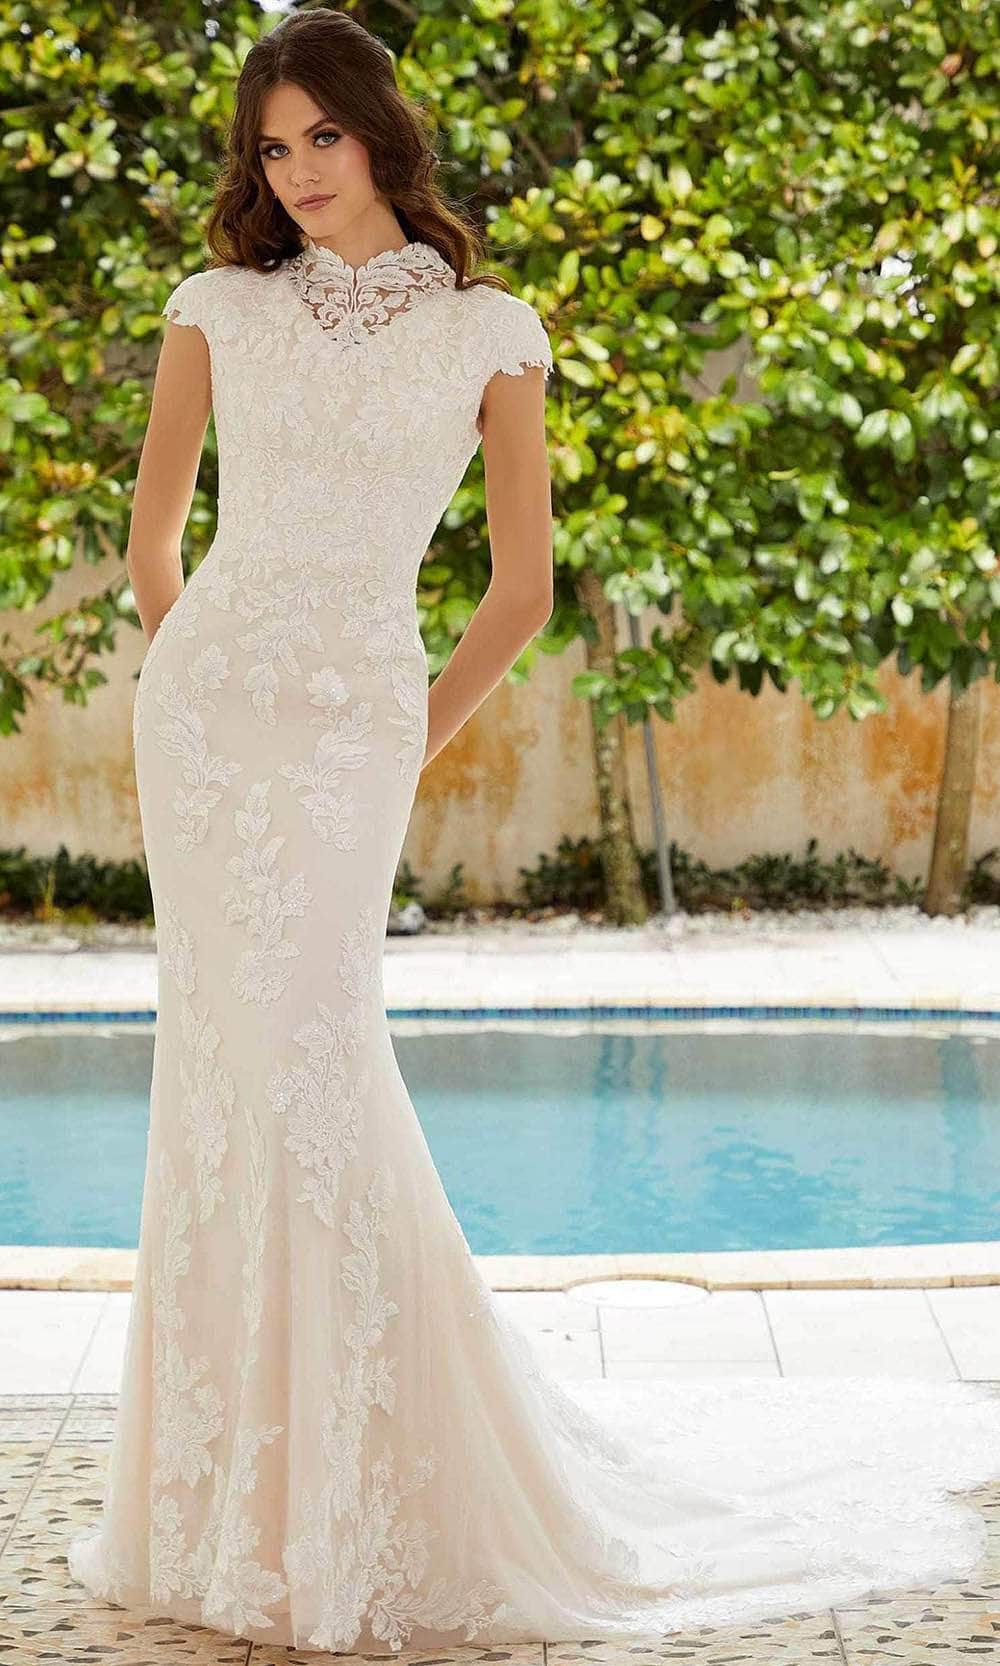 Mori Lee Bridal 30121 - High Neck Cap Sleeve Wedding Gown Special Occasion Dress